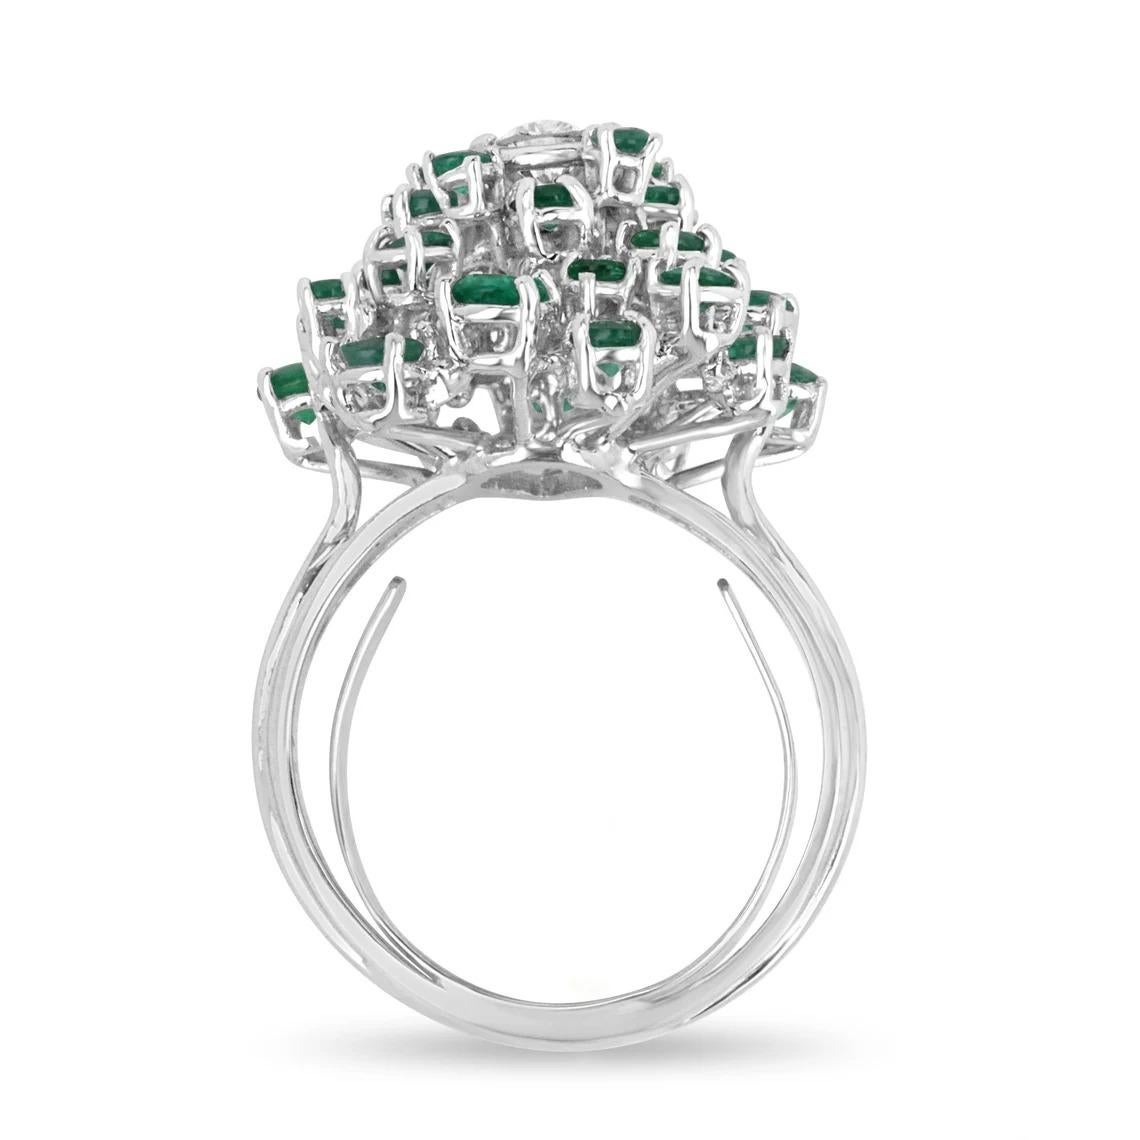 A pear cut diamond & Colombian Emerald cluster statement ring in 14K white ring. A VVS1 quality diamond is set in the midst of an emerald sea. Offering full finger coverage, this ring showcases exquisite gemstones in a one-of-a-kind